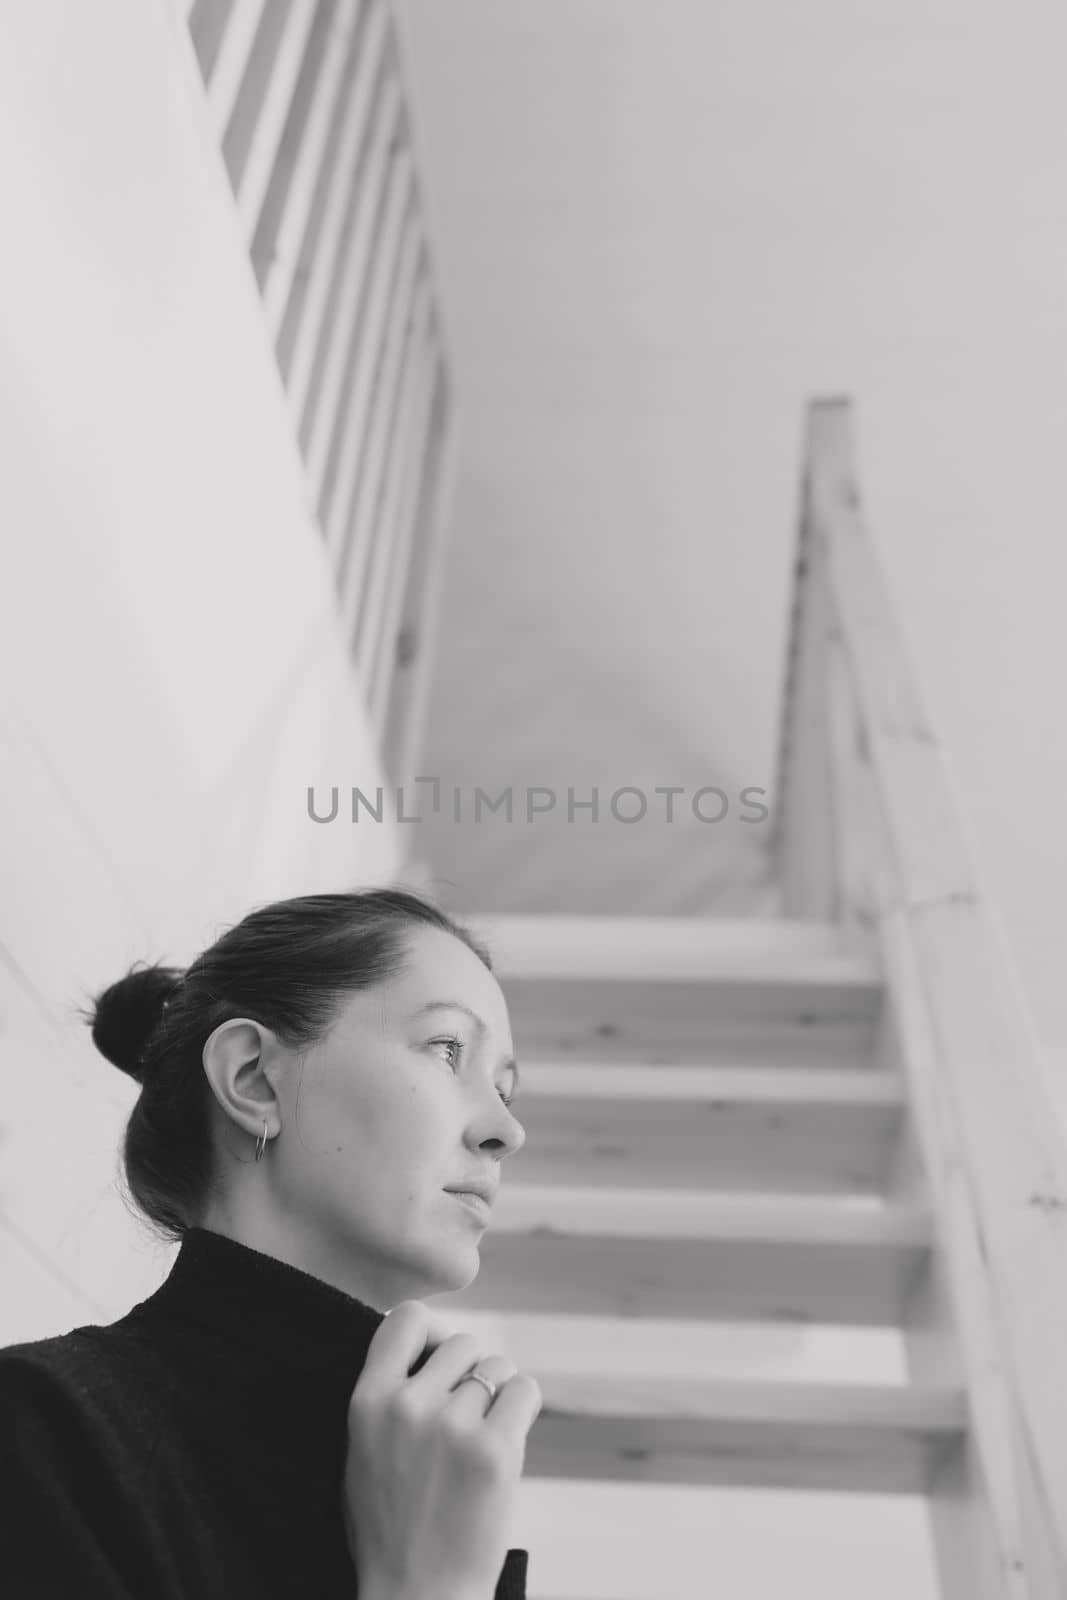 Young woman simple hairstyle against wooden stairs. Depression, loneliness and quarantine concept. Mental health, Self care, staying home. Black and white photo by paralisart